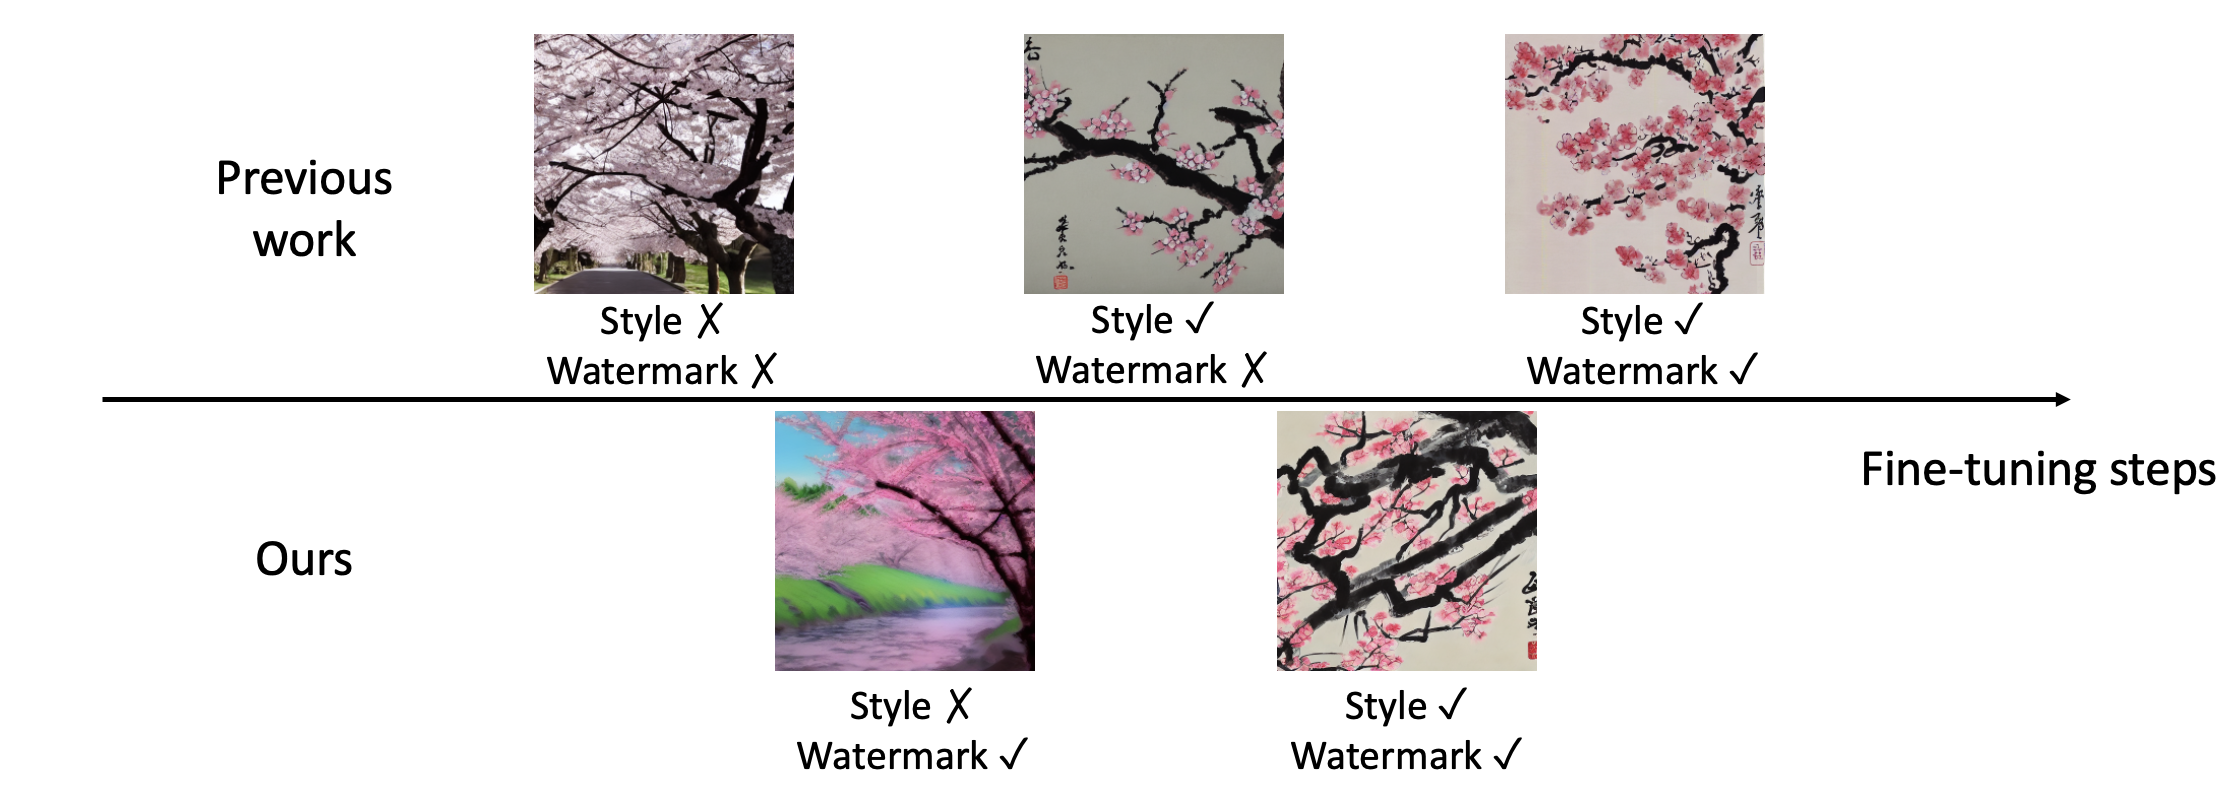 FT-Shield: A Watermark Against Unauthorized Fine-tuning in Text-to-Image Diffusion Models